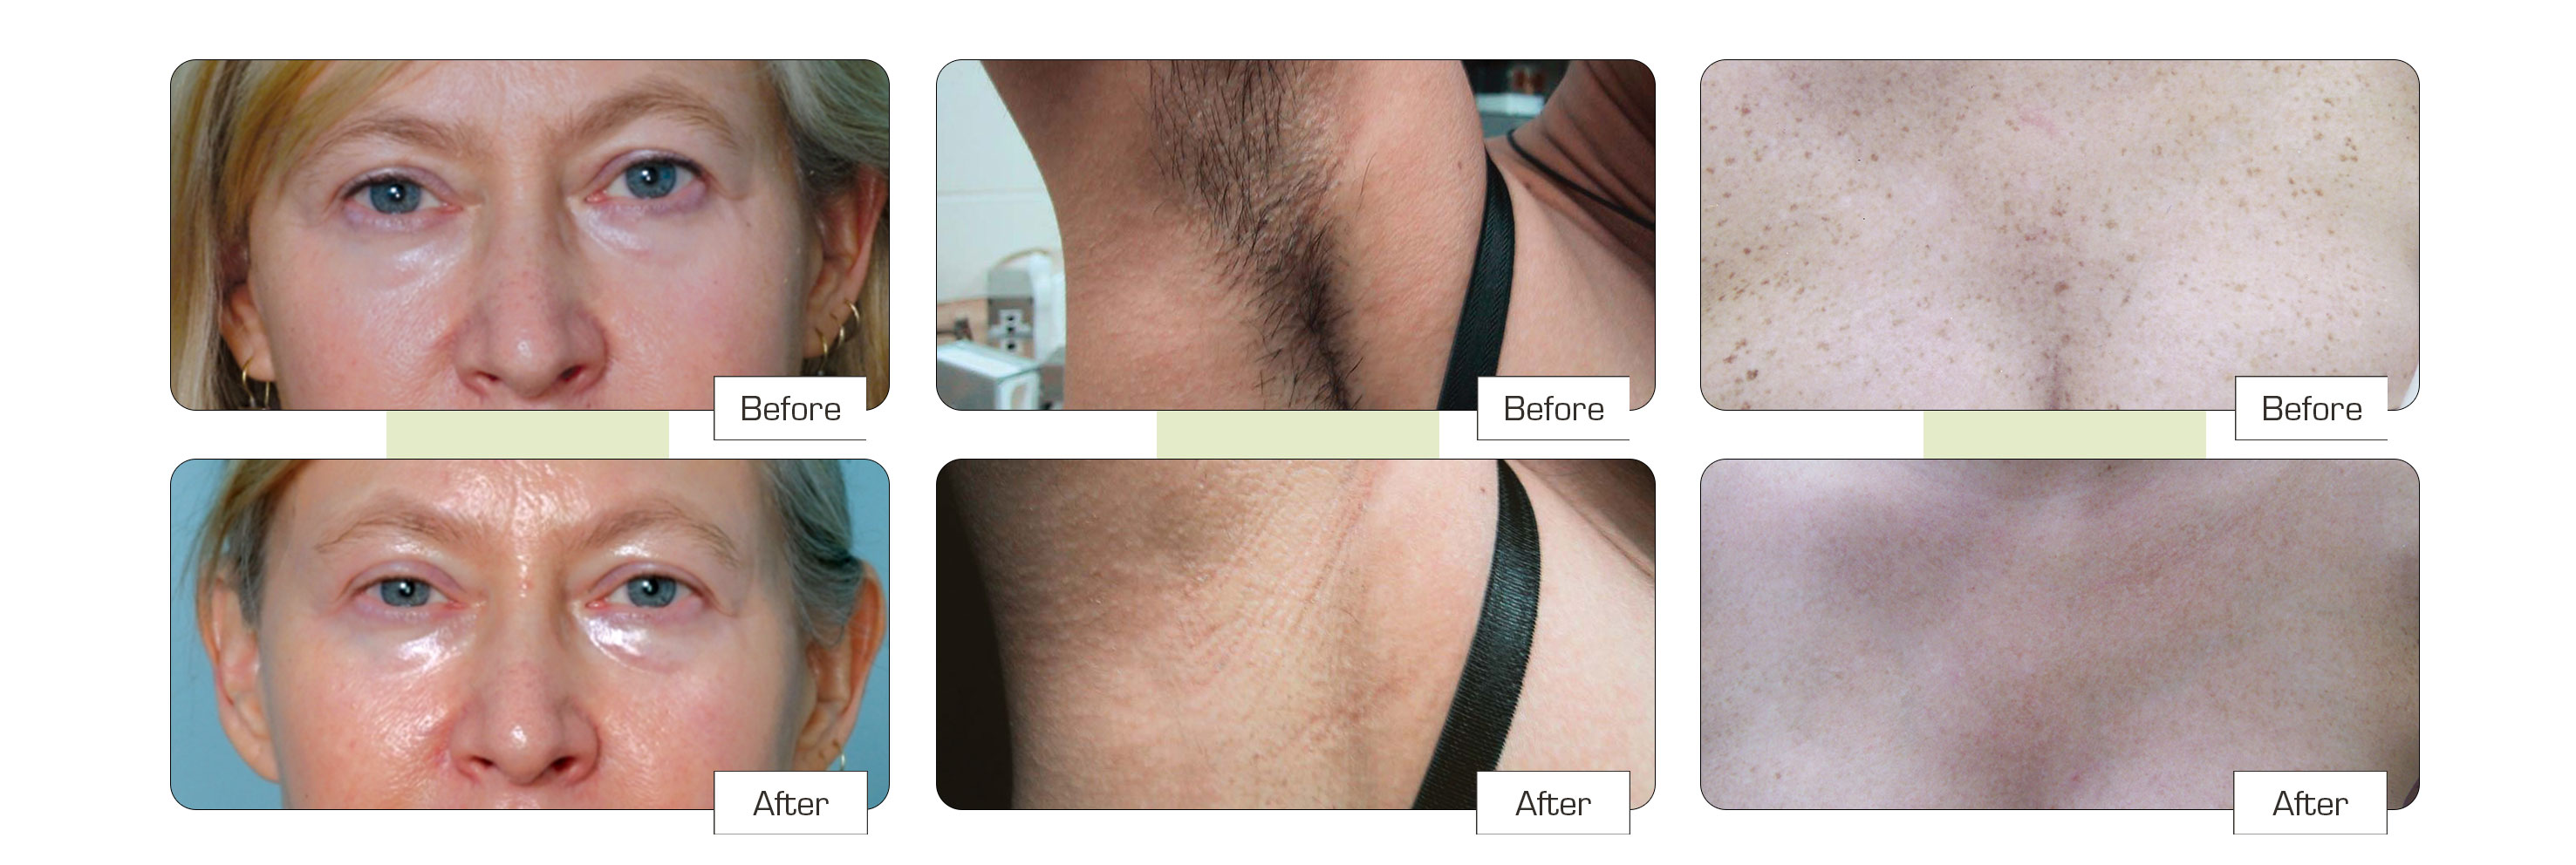 Laser hair removal Colchester before and after images